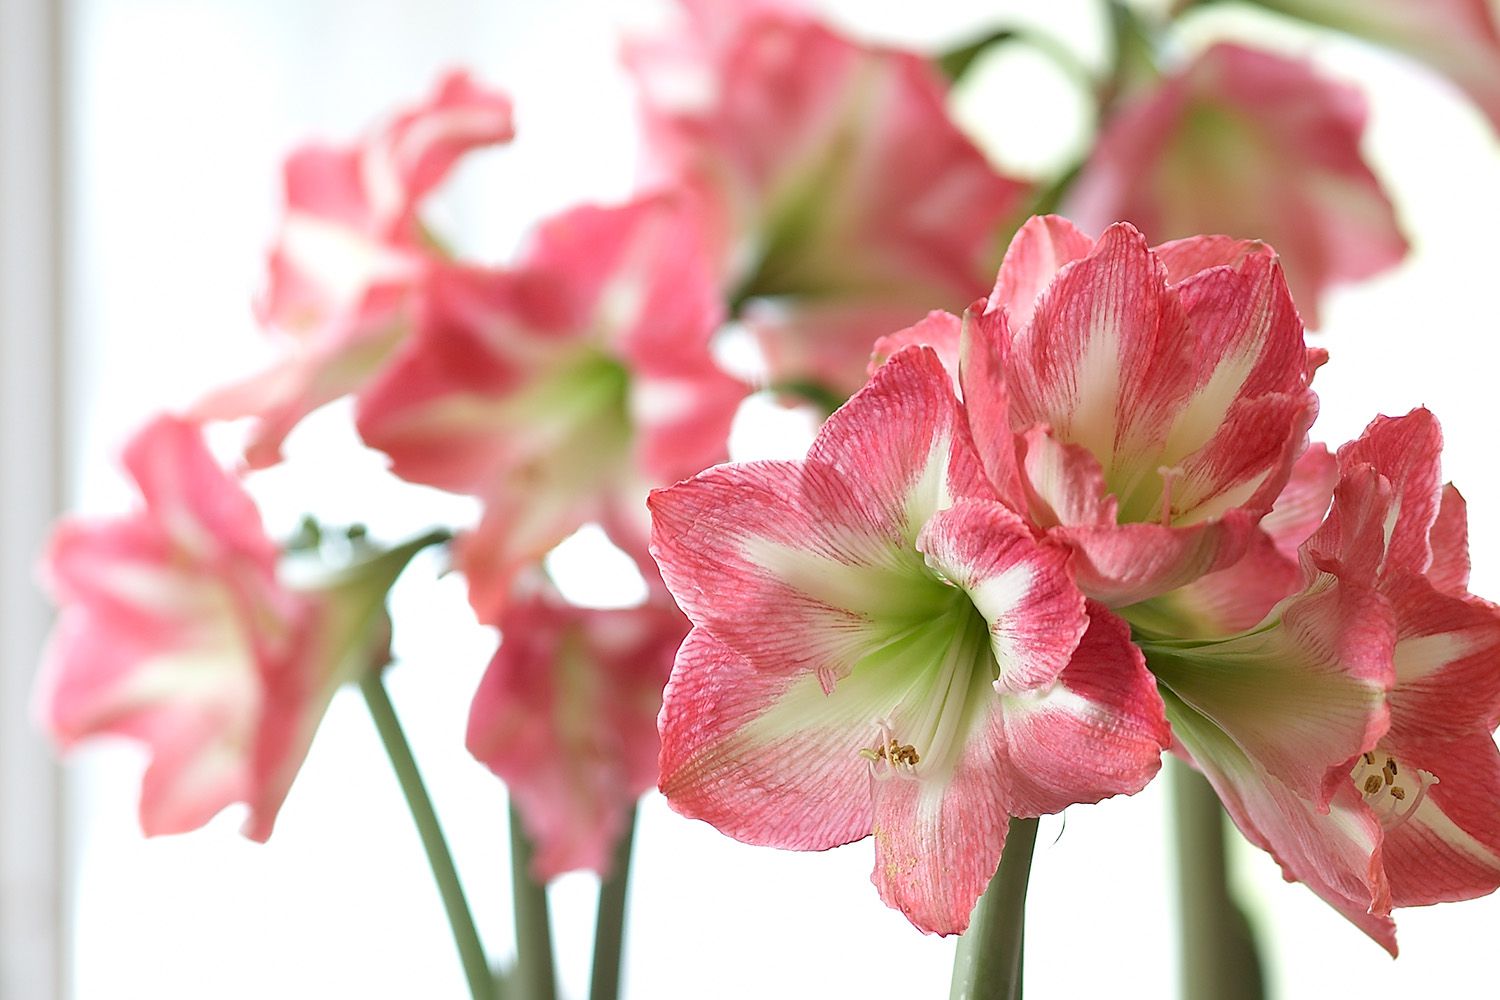 What do you do with an amaryllis after it blooms Don't discard it – follow these tips instead